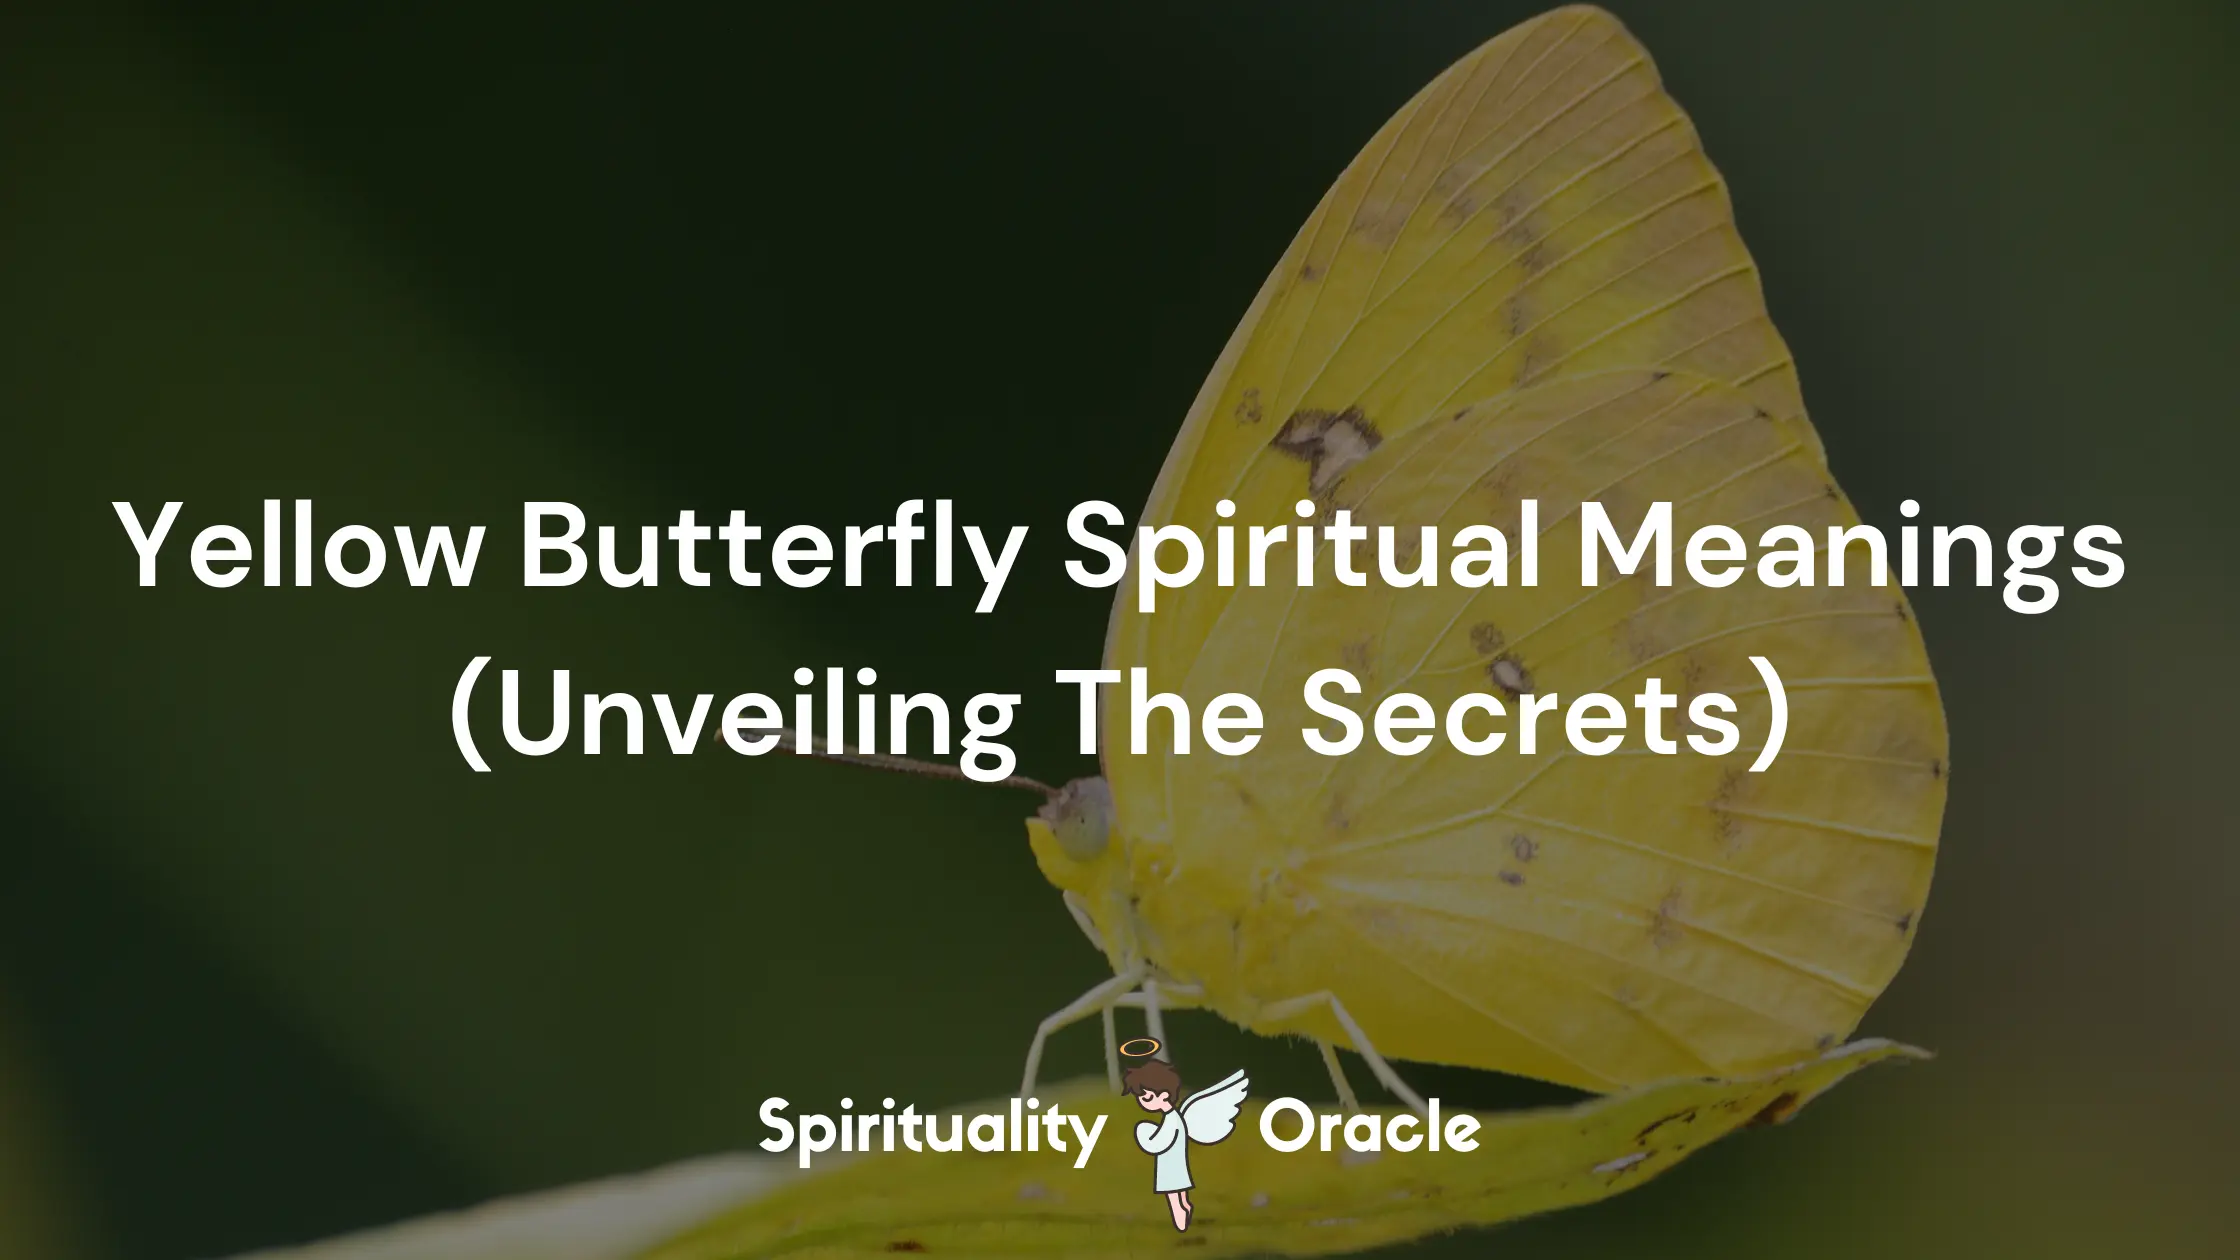 Yellow Butterfly Spiritual Meanings (Unveiling The Secrets)